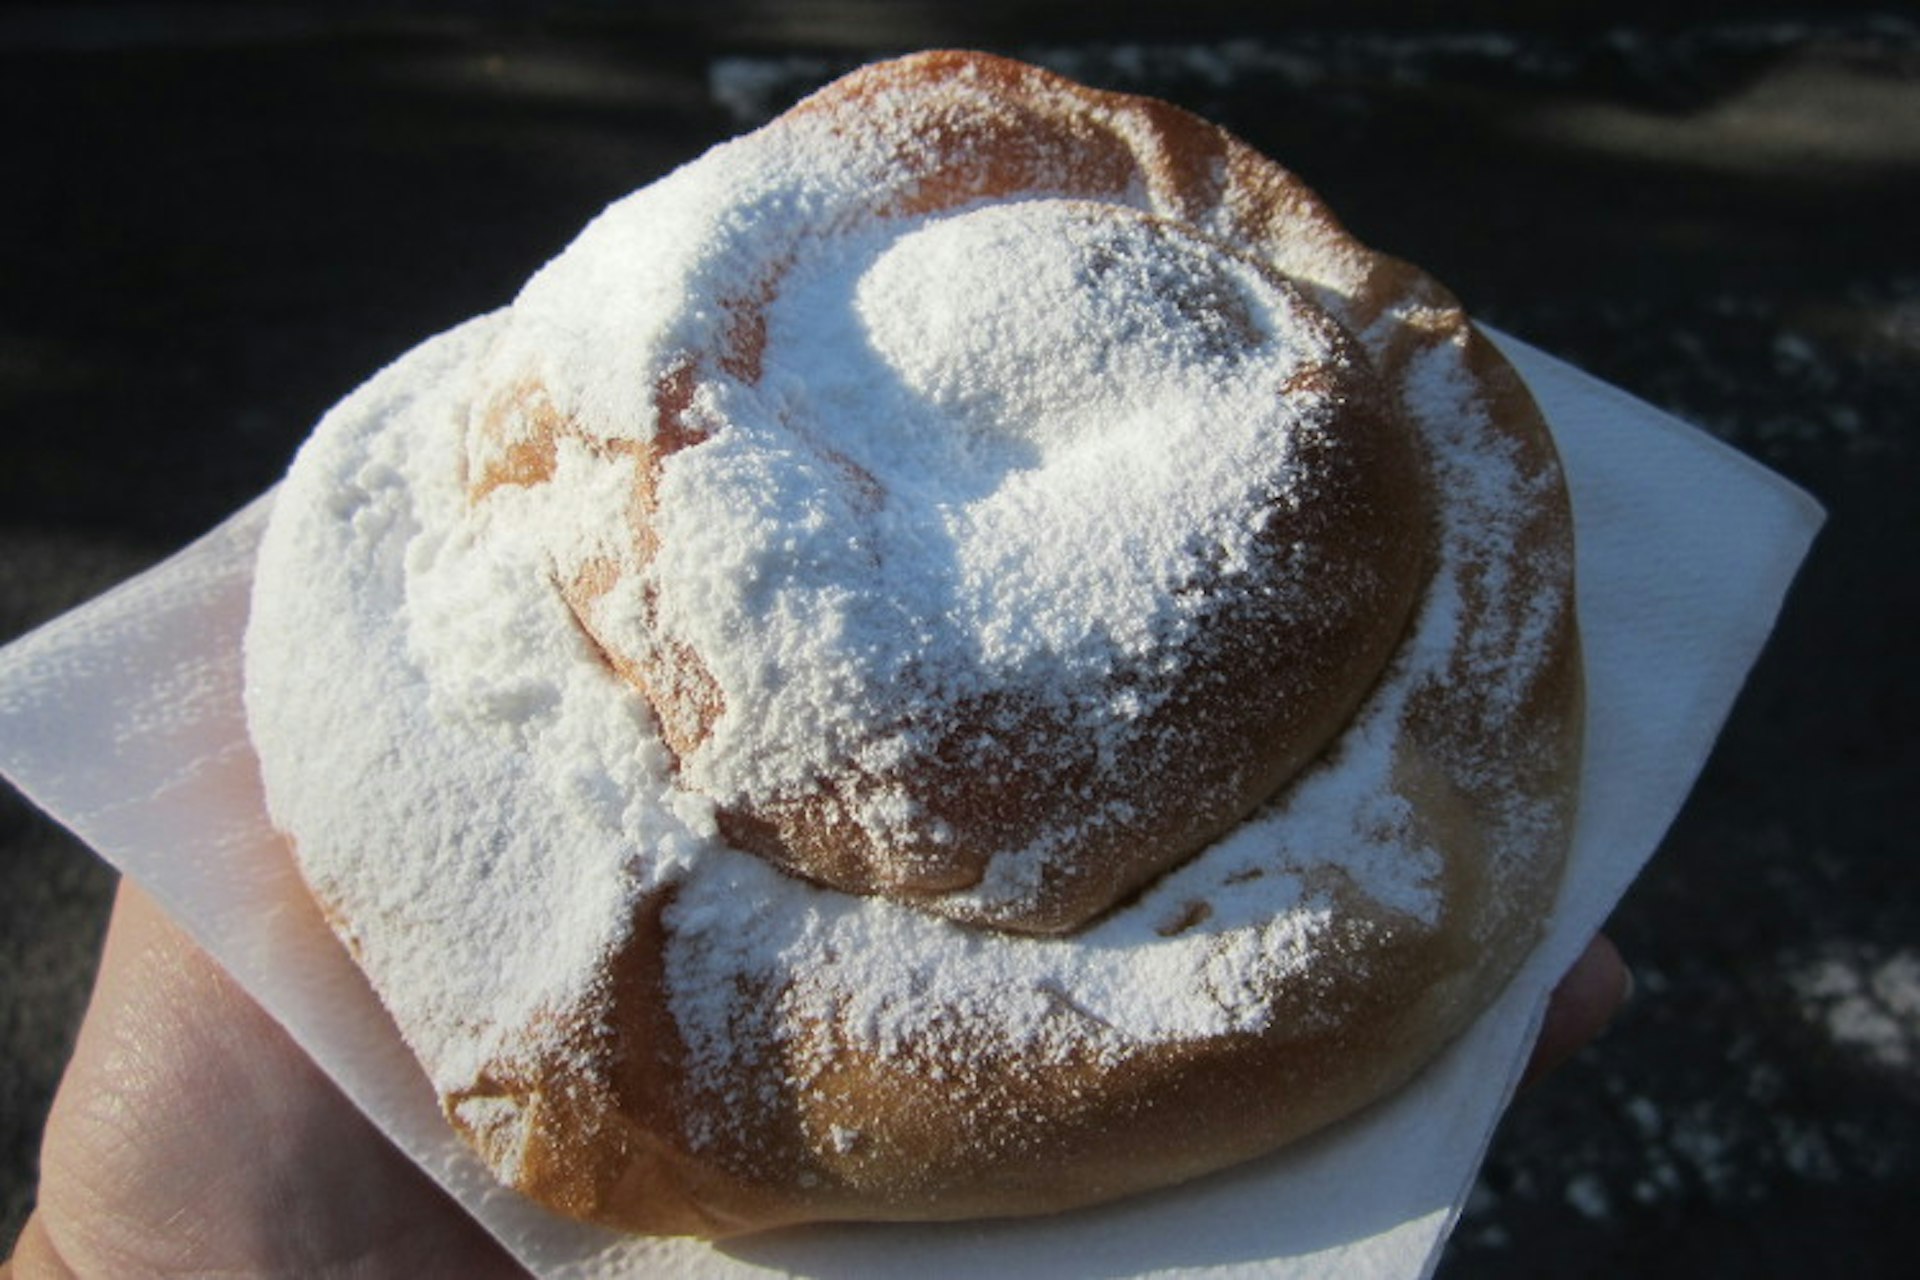 A Mallorcan ensaïmades, dusted with icing. Image by Kim / CC BY-SA 2.0